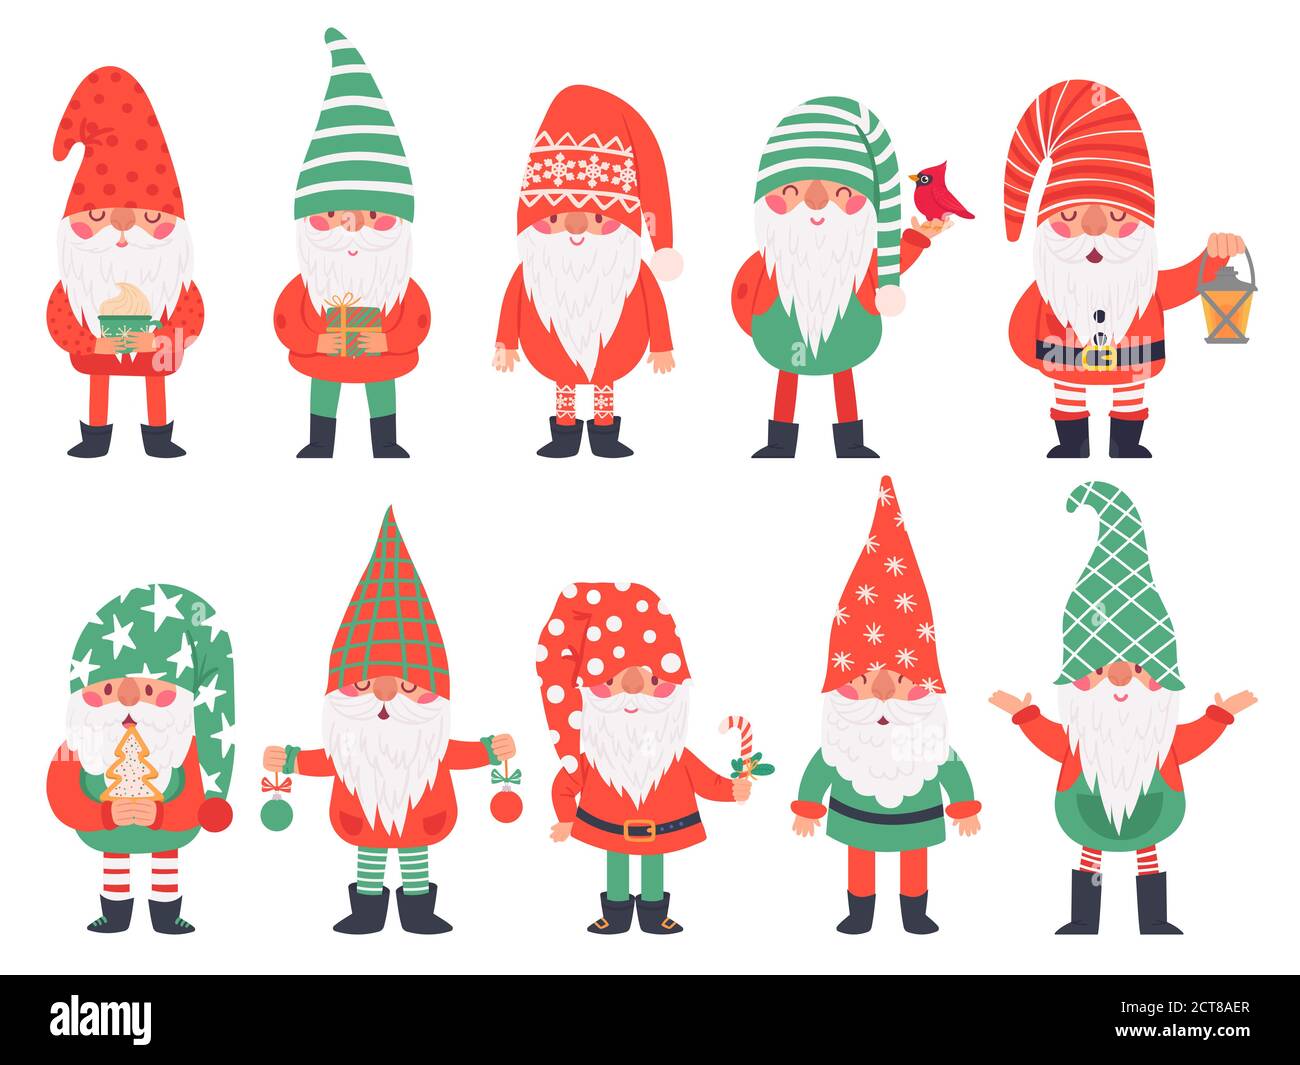 Christmas dwarfs. Funny fabulous gnomes in red costumes, xmas gnome with lantern traditional decoration, winter holiday vector characters. Illustratio Stock Vector